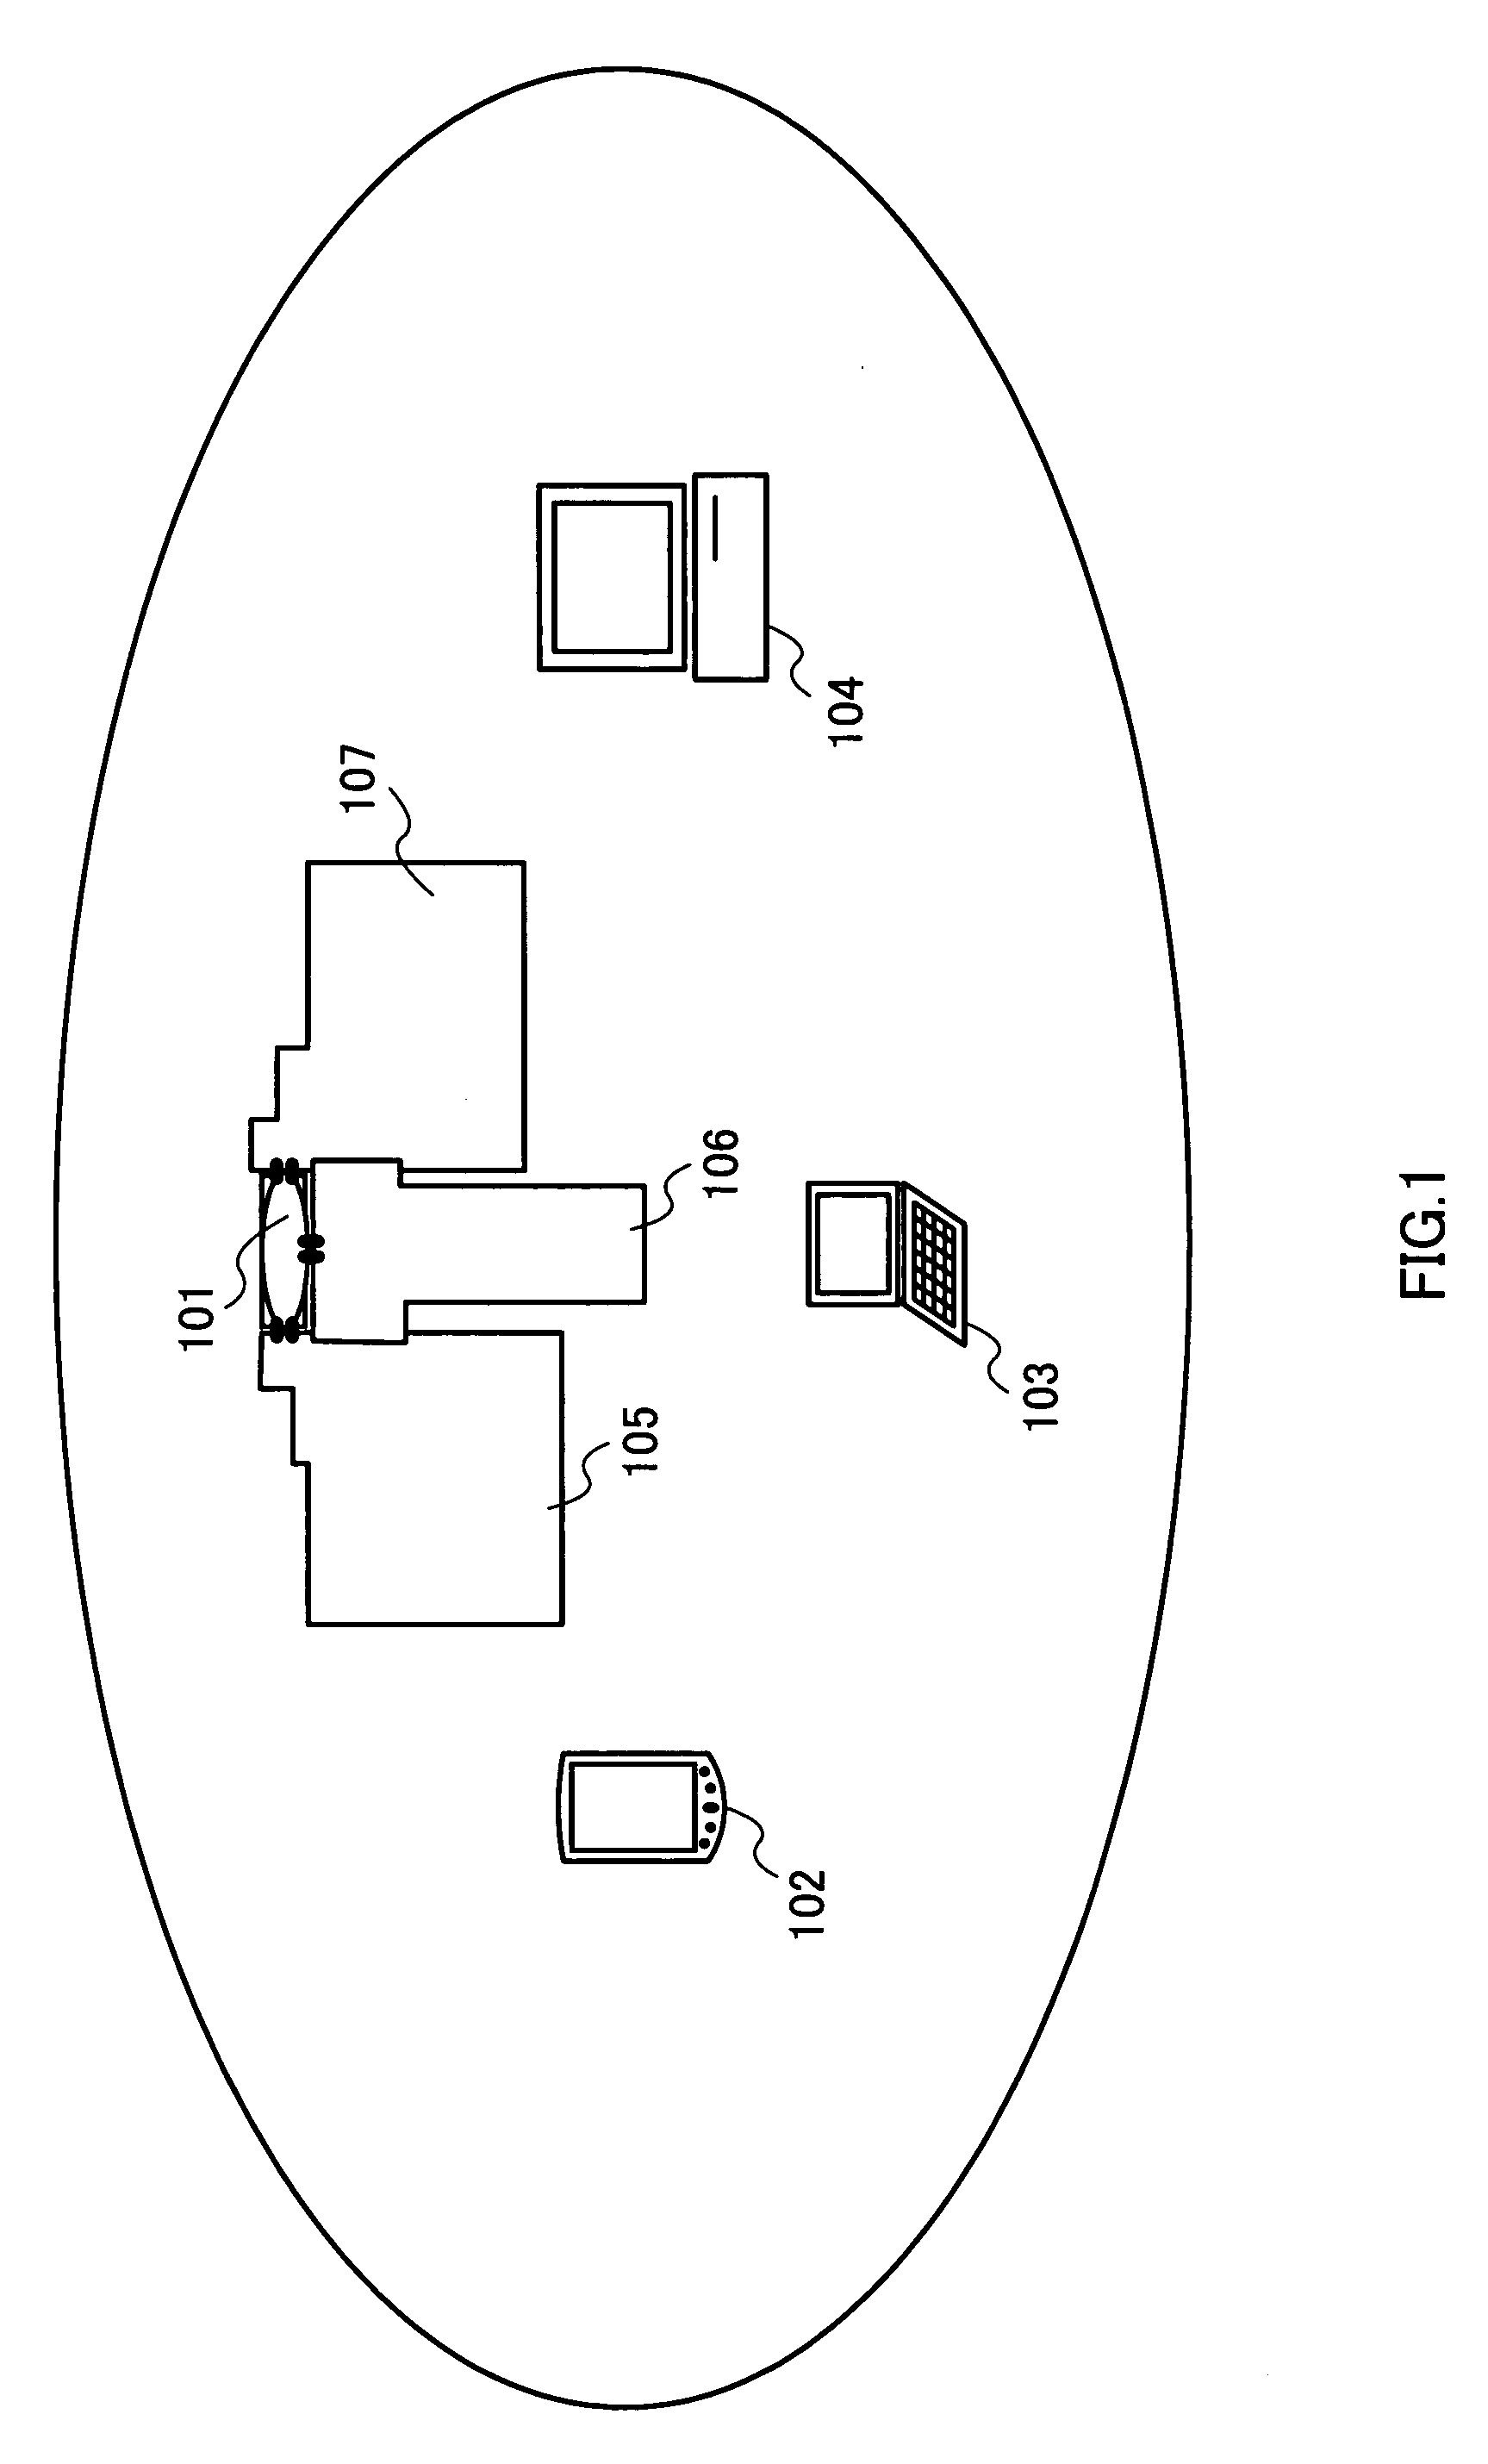 Method and system for controlling medium access in a wireless network